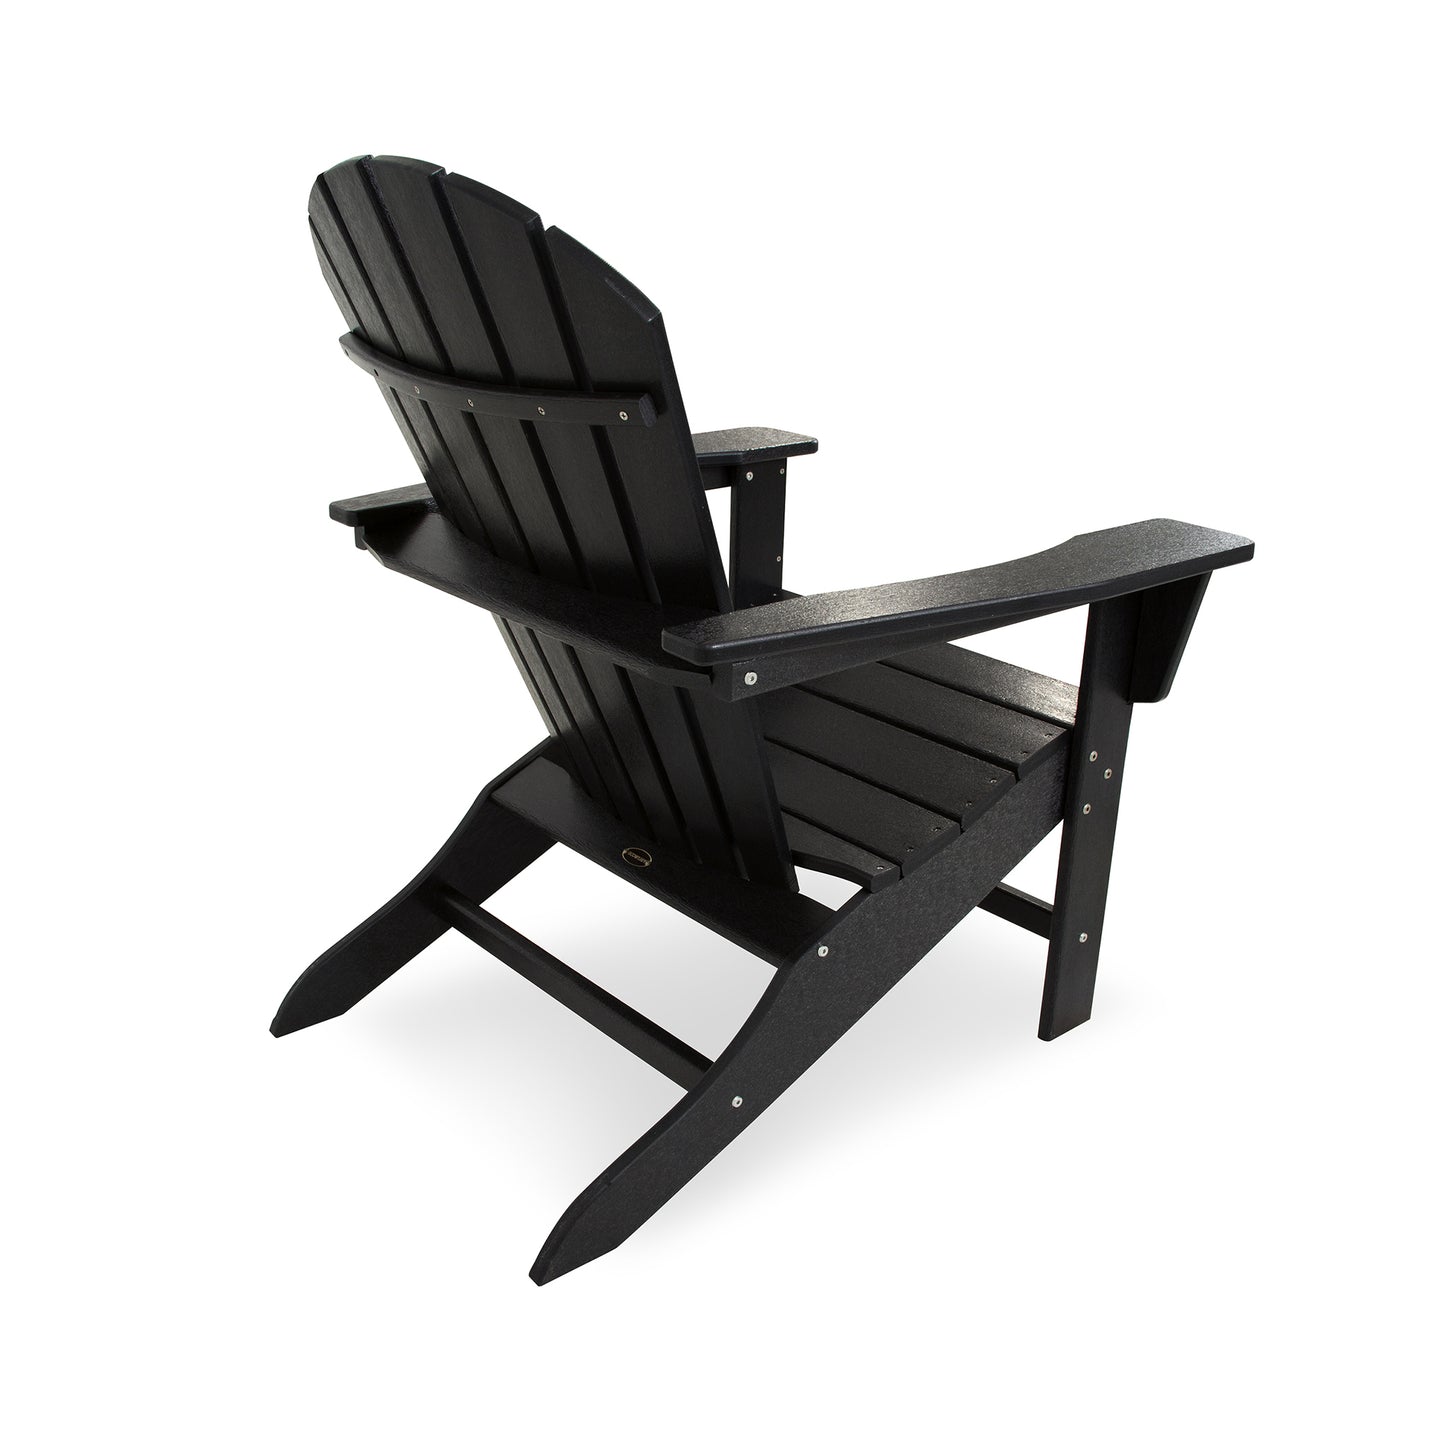 A black POLYWOOD® South Beach Adirondack chair made of synthetic material, shown from a side angle against a white background. The chair features wide armrests and a slanted back.